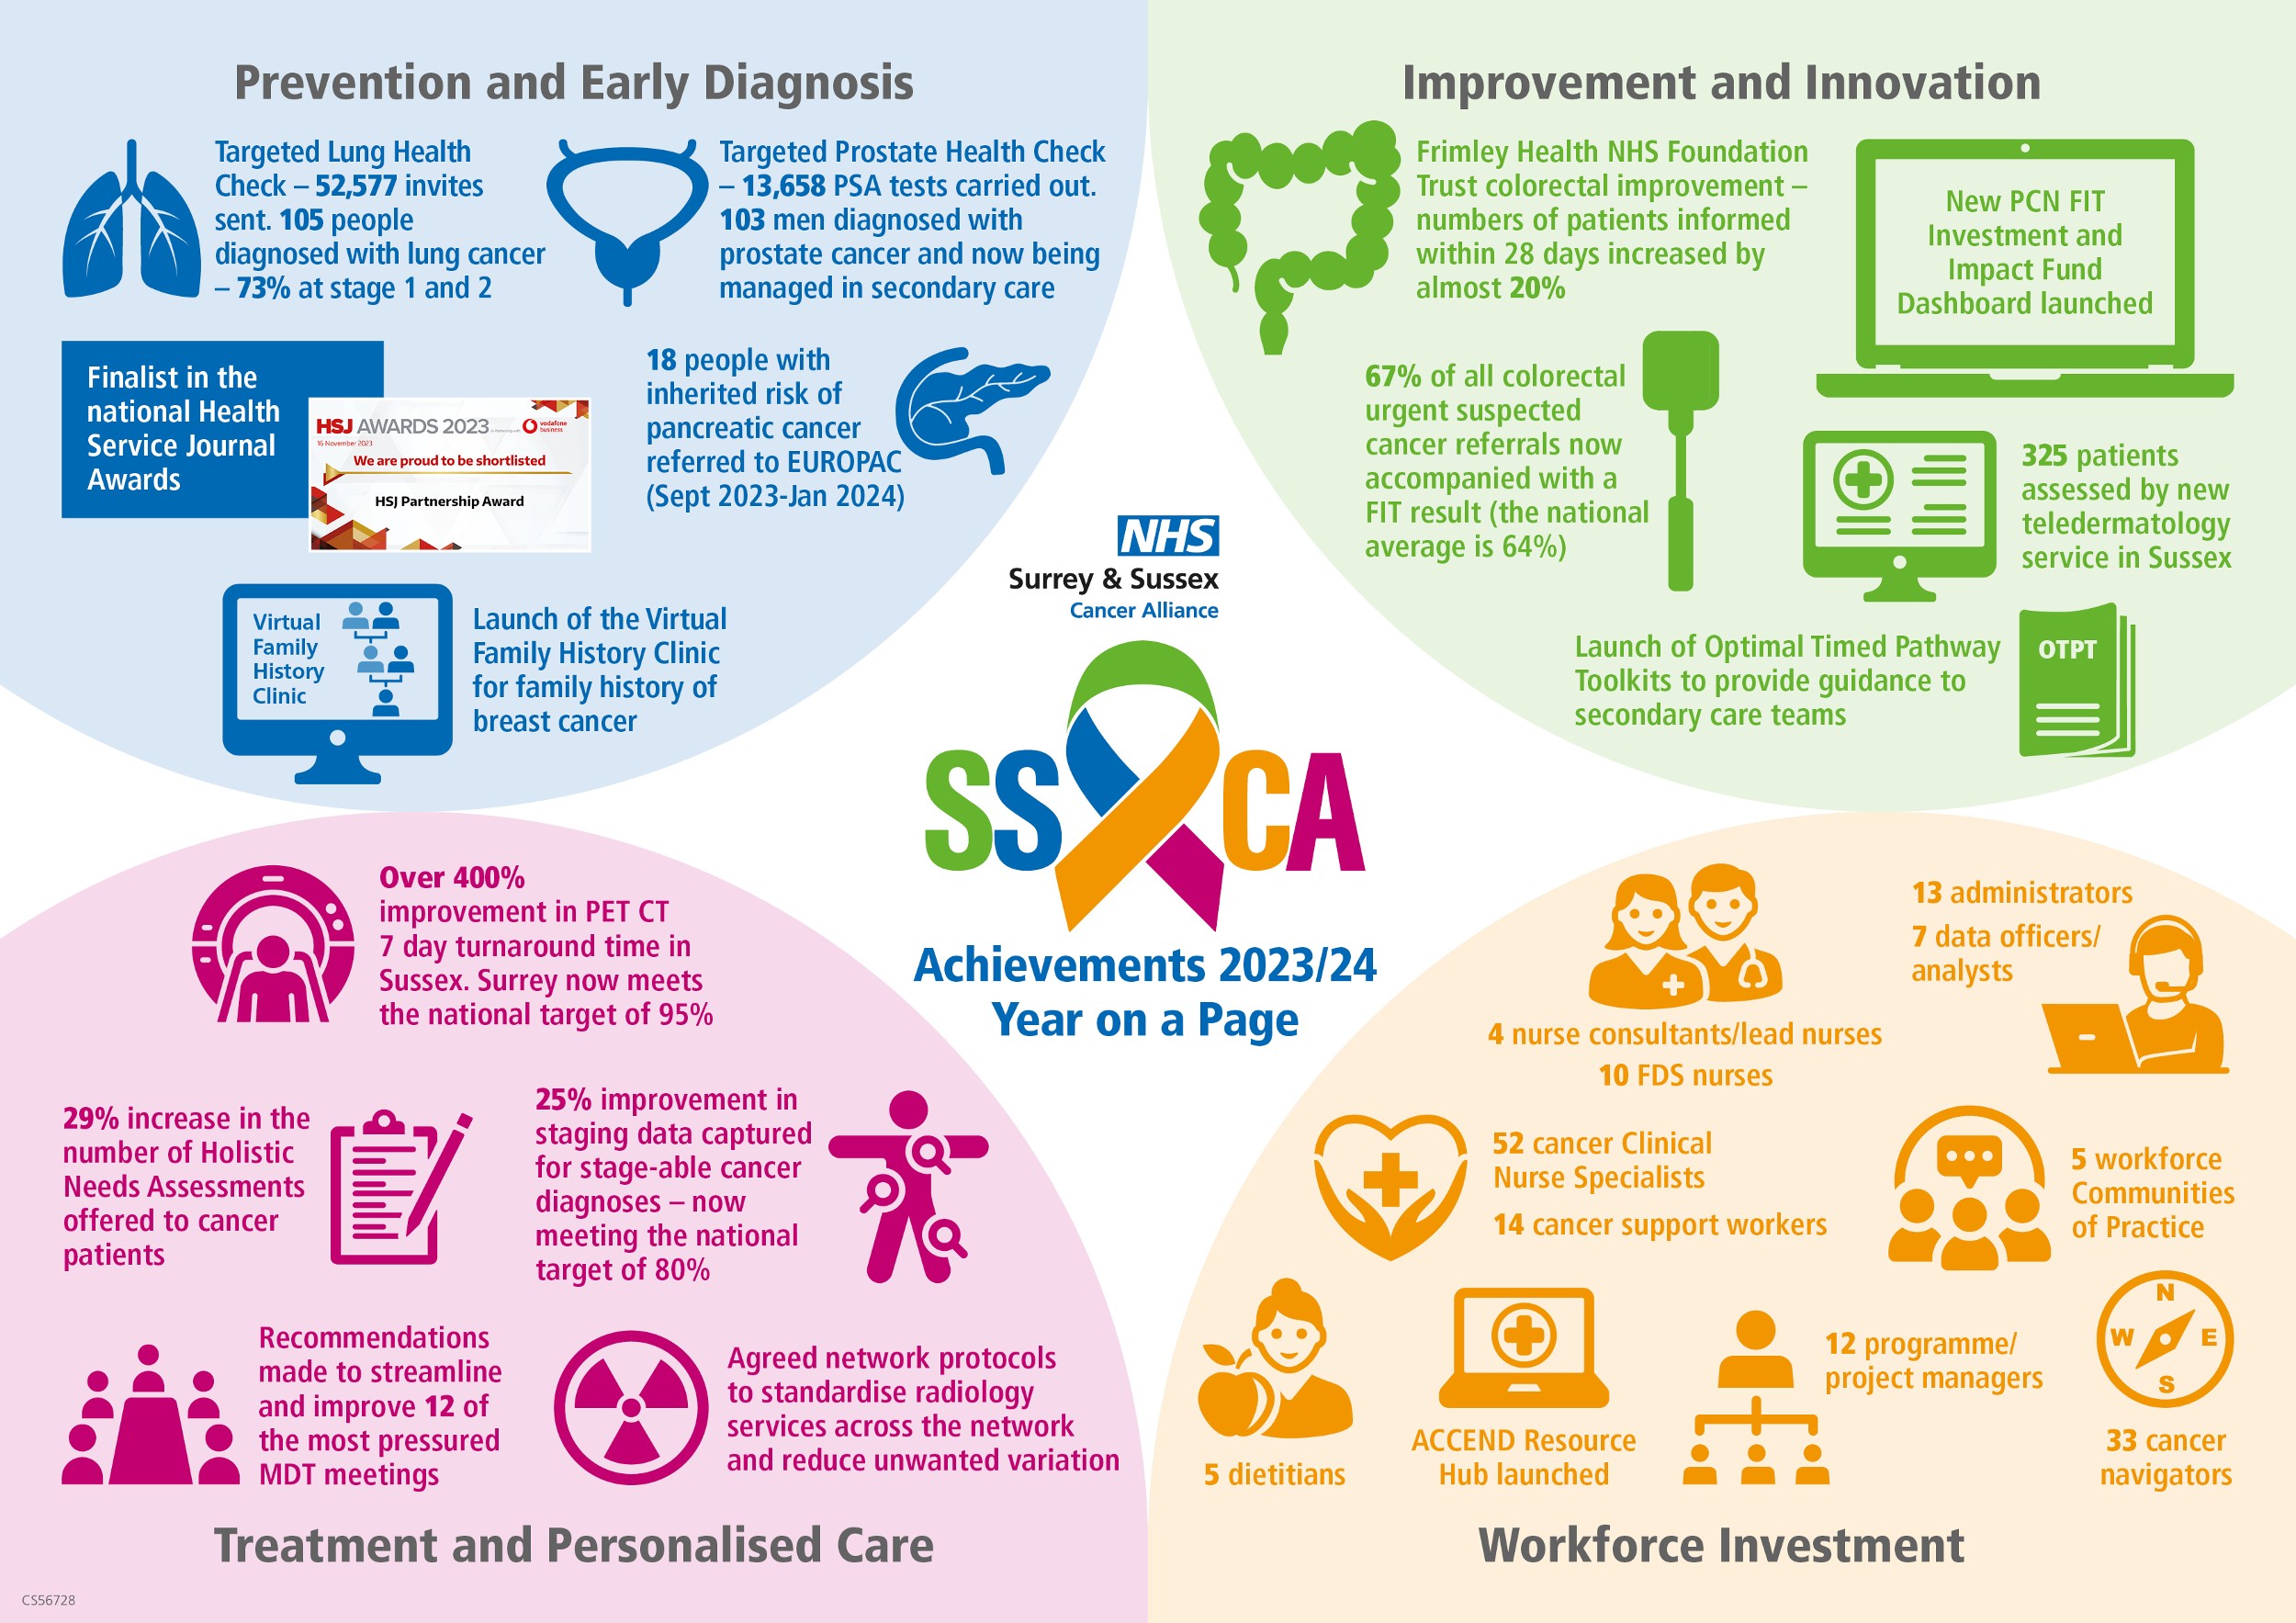  A year on a page image detailing Surrey and Sussex Cancer Alliance's highlights of 2023-2024